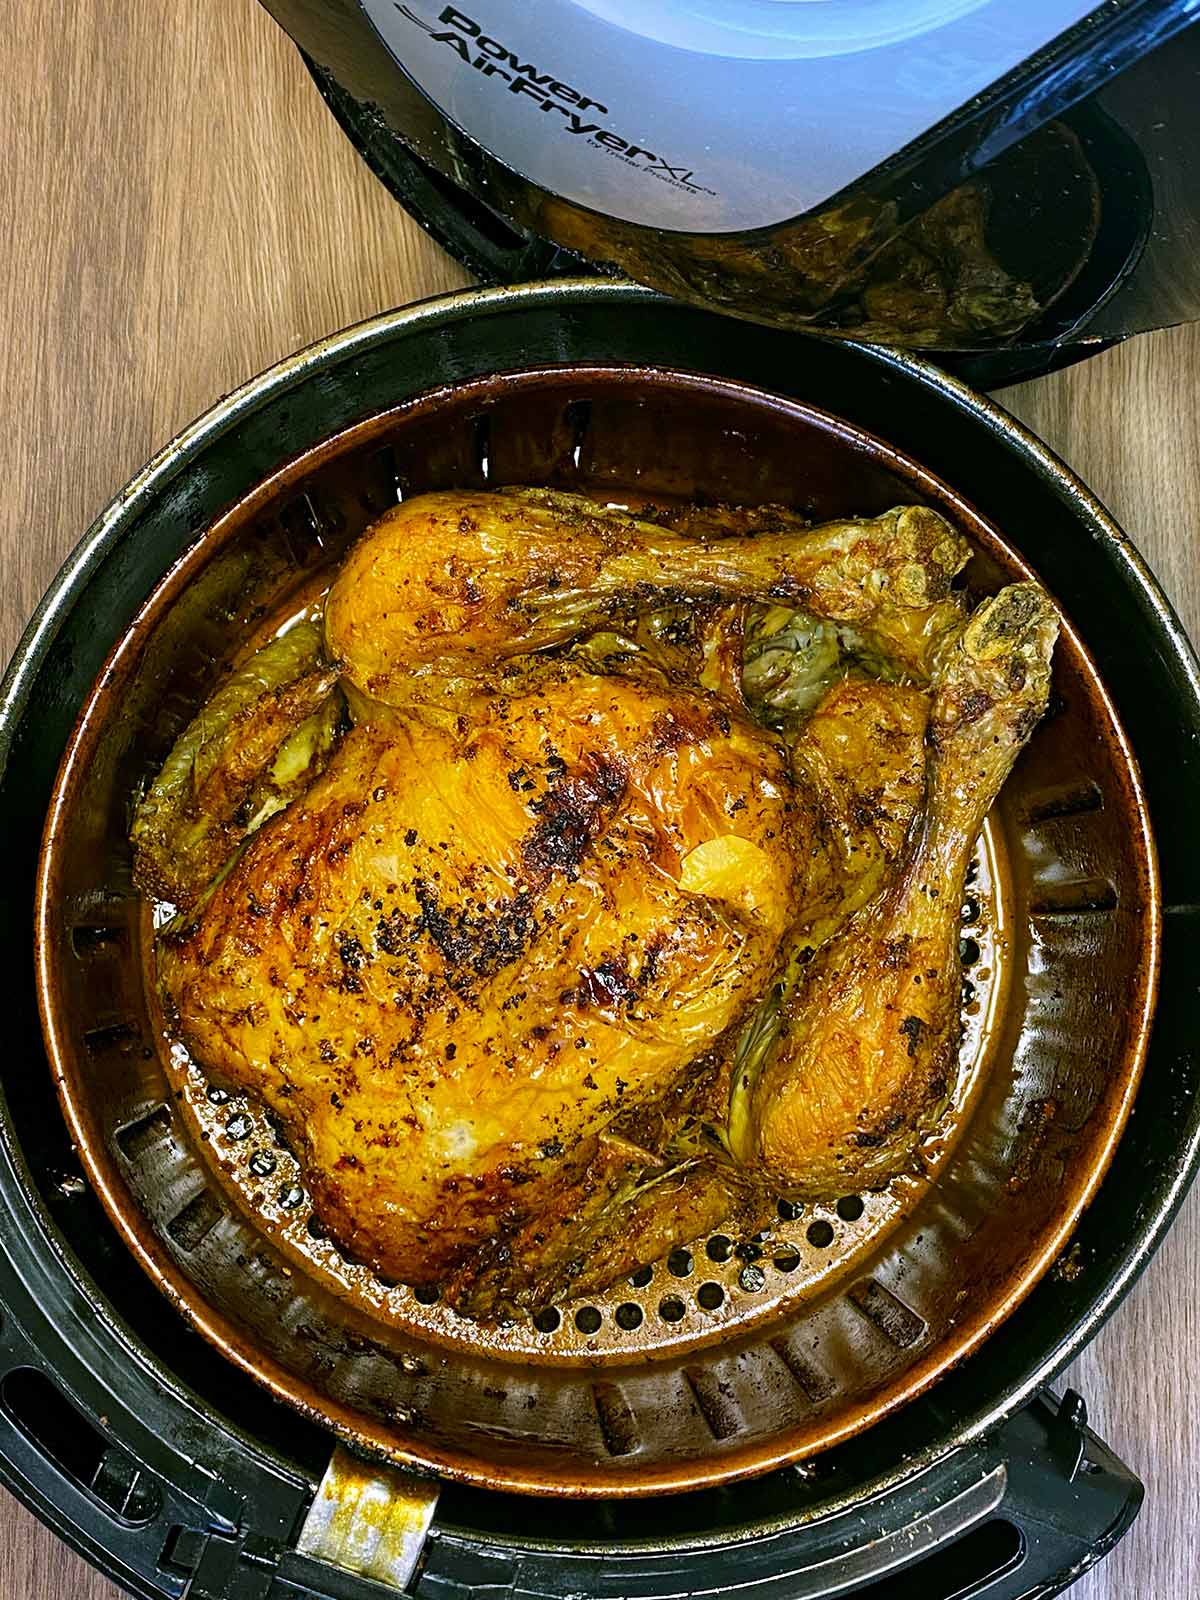 Cooked whole chicken in an air fryer basket.